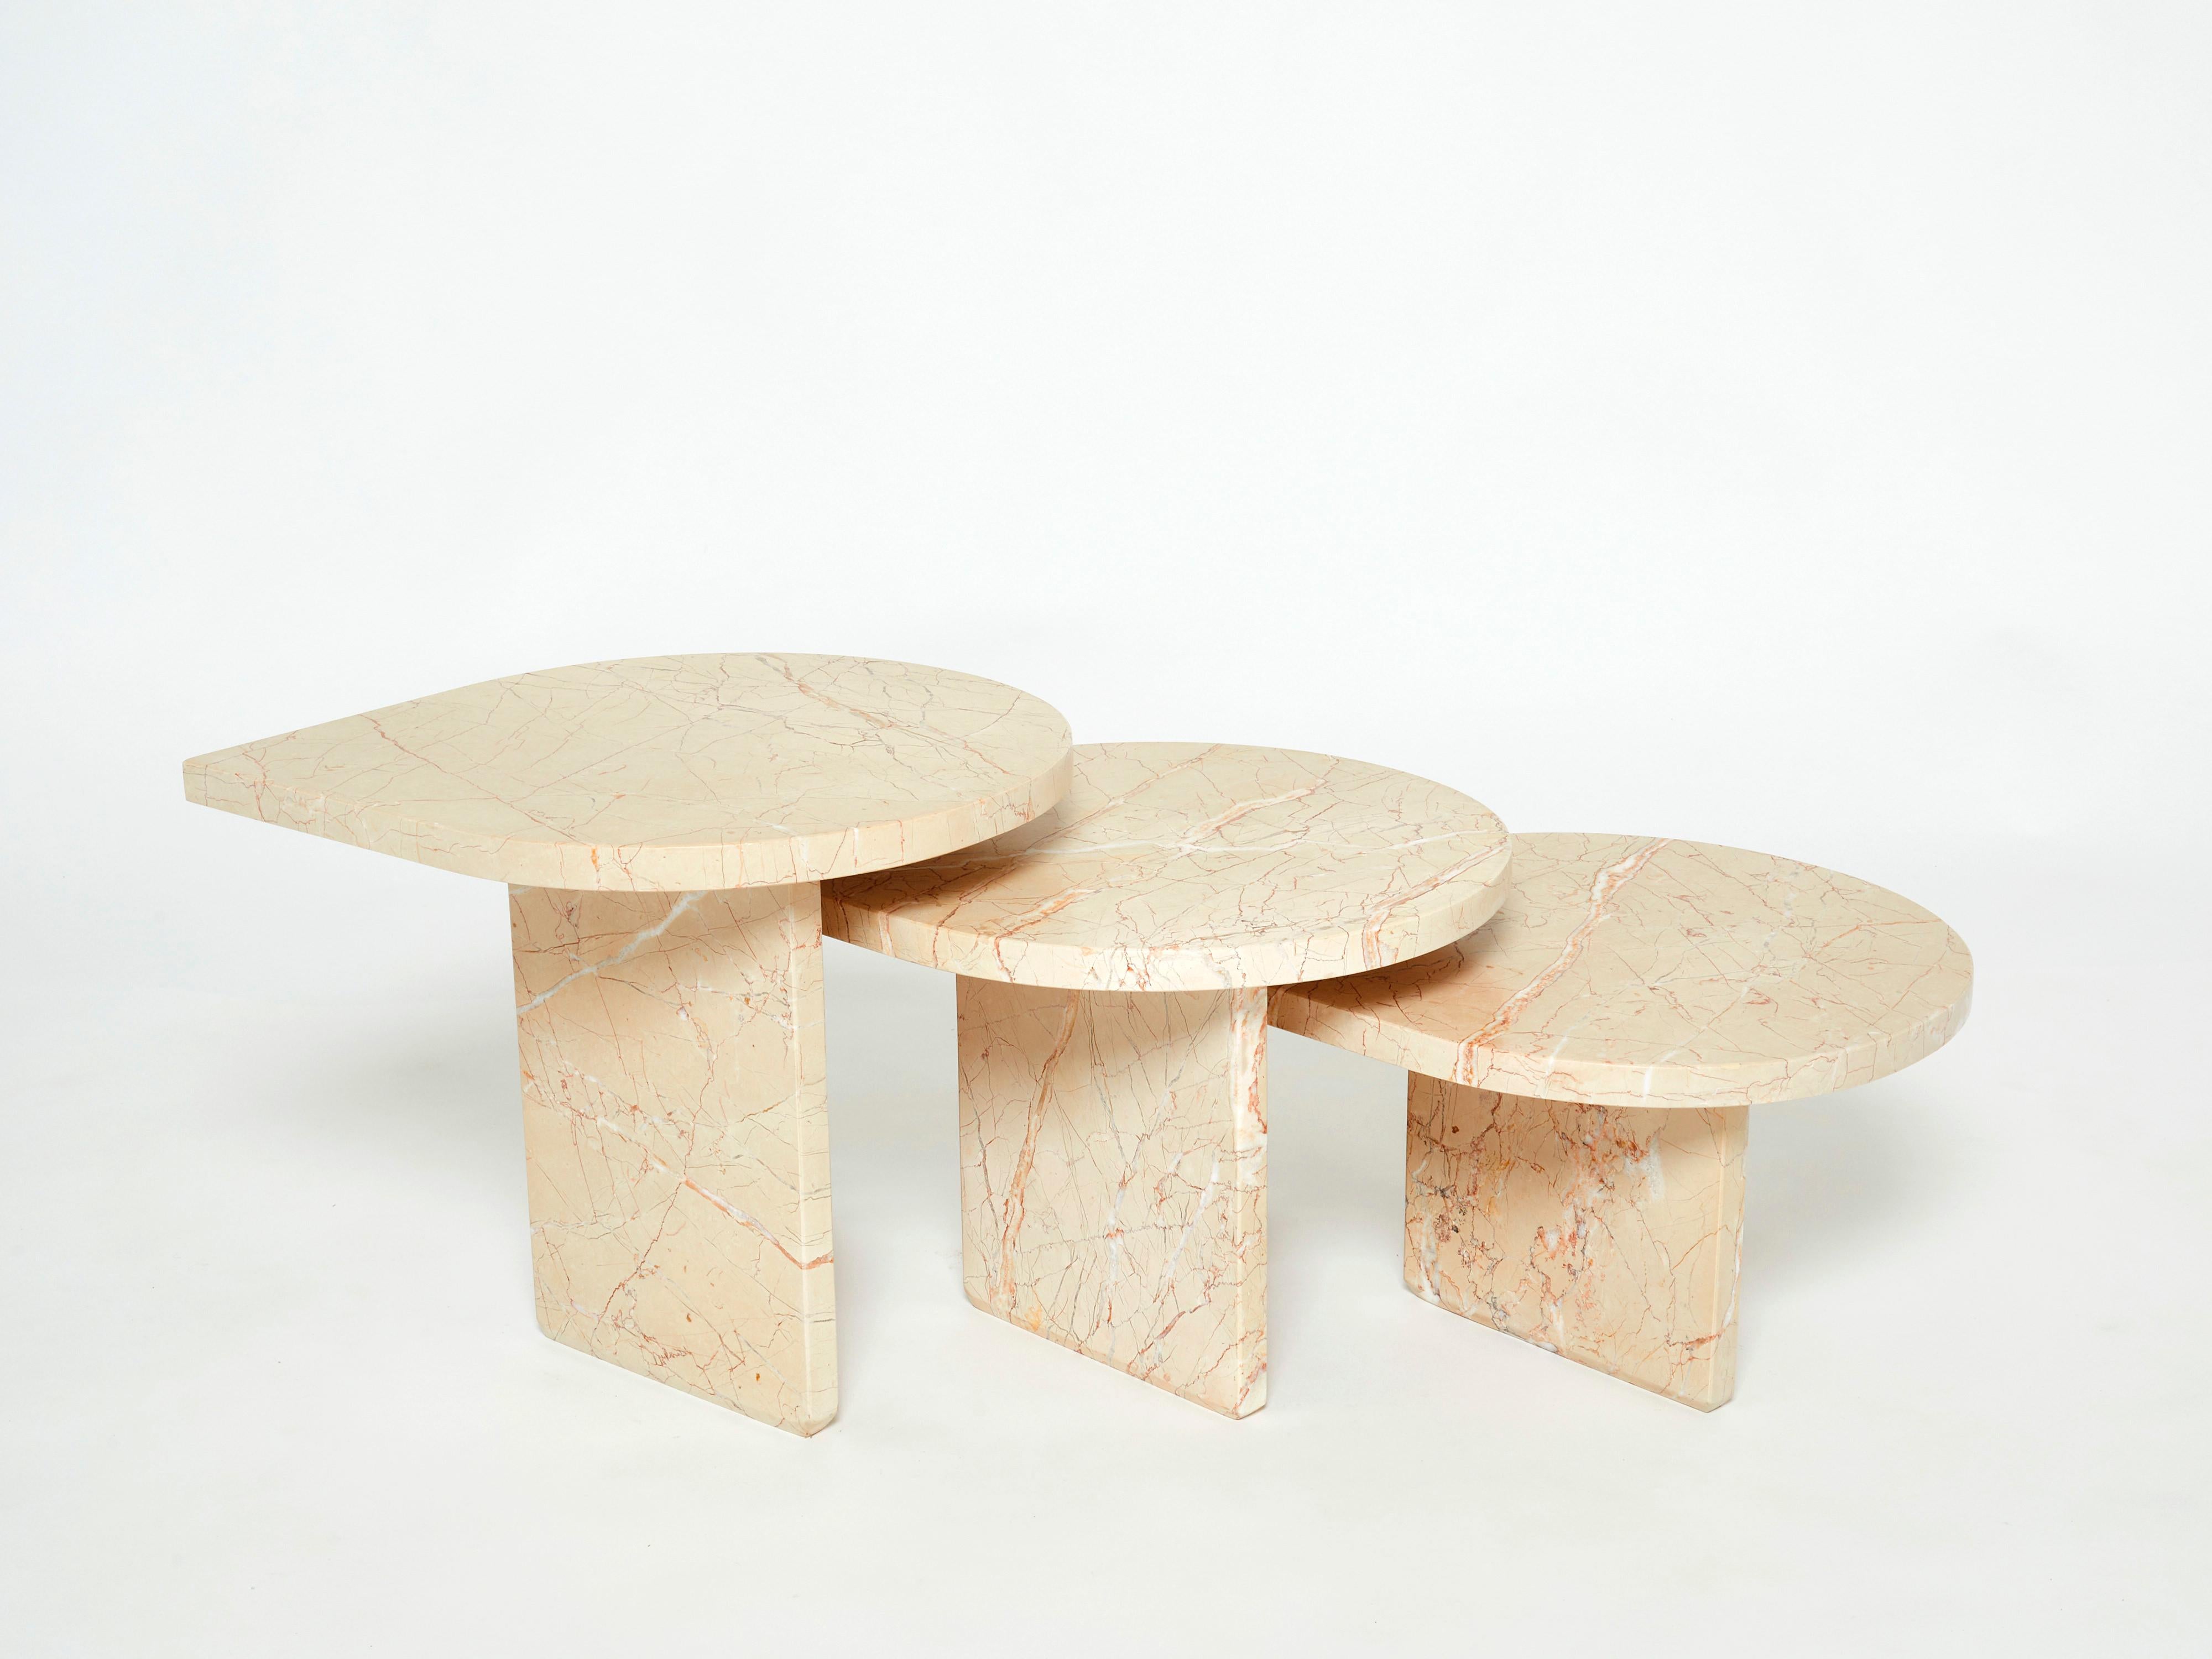 Unique set of three nesting tables made in France in the early 1970s from a beautiful sicilian light pale pink marble. The thick surface of each table is slick yet intriguing, with a beautiful and original shape. The result is a sophisticated,